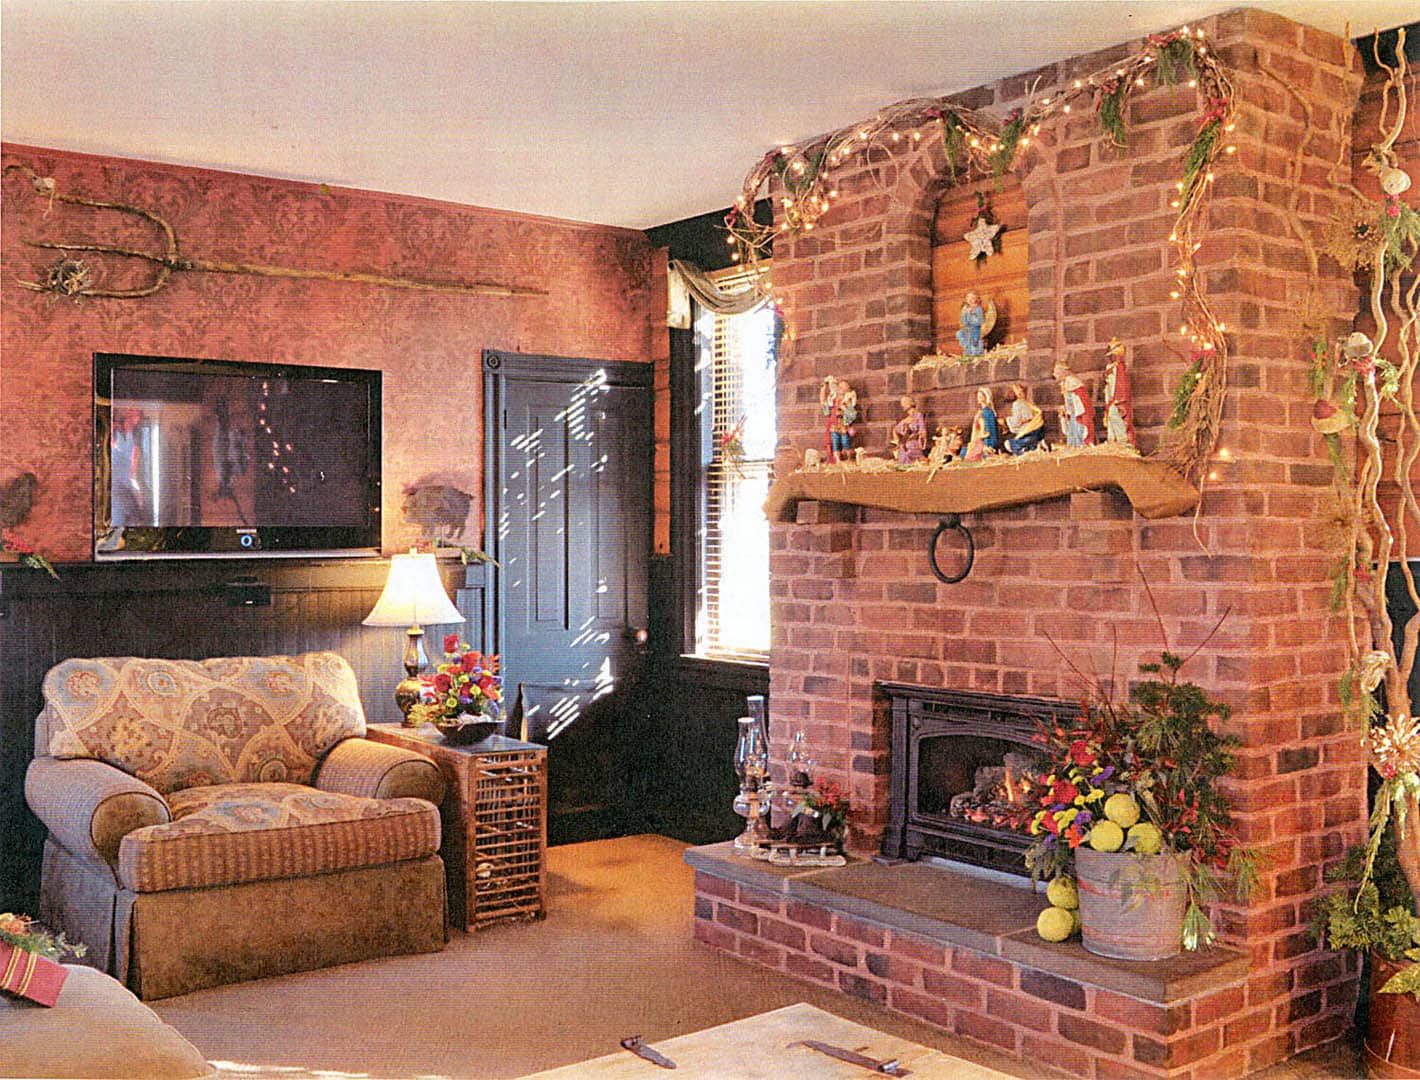 Home Interior Design: Brick Fireplace in Living Room